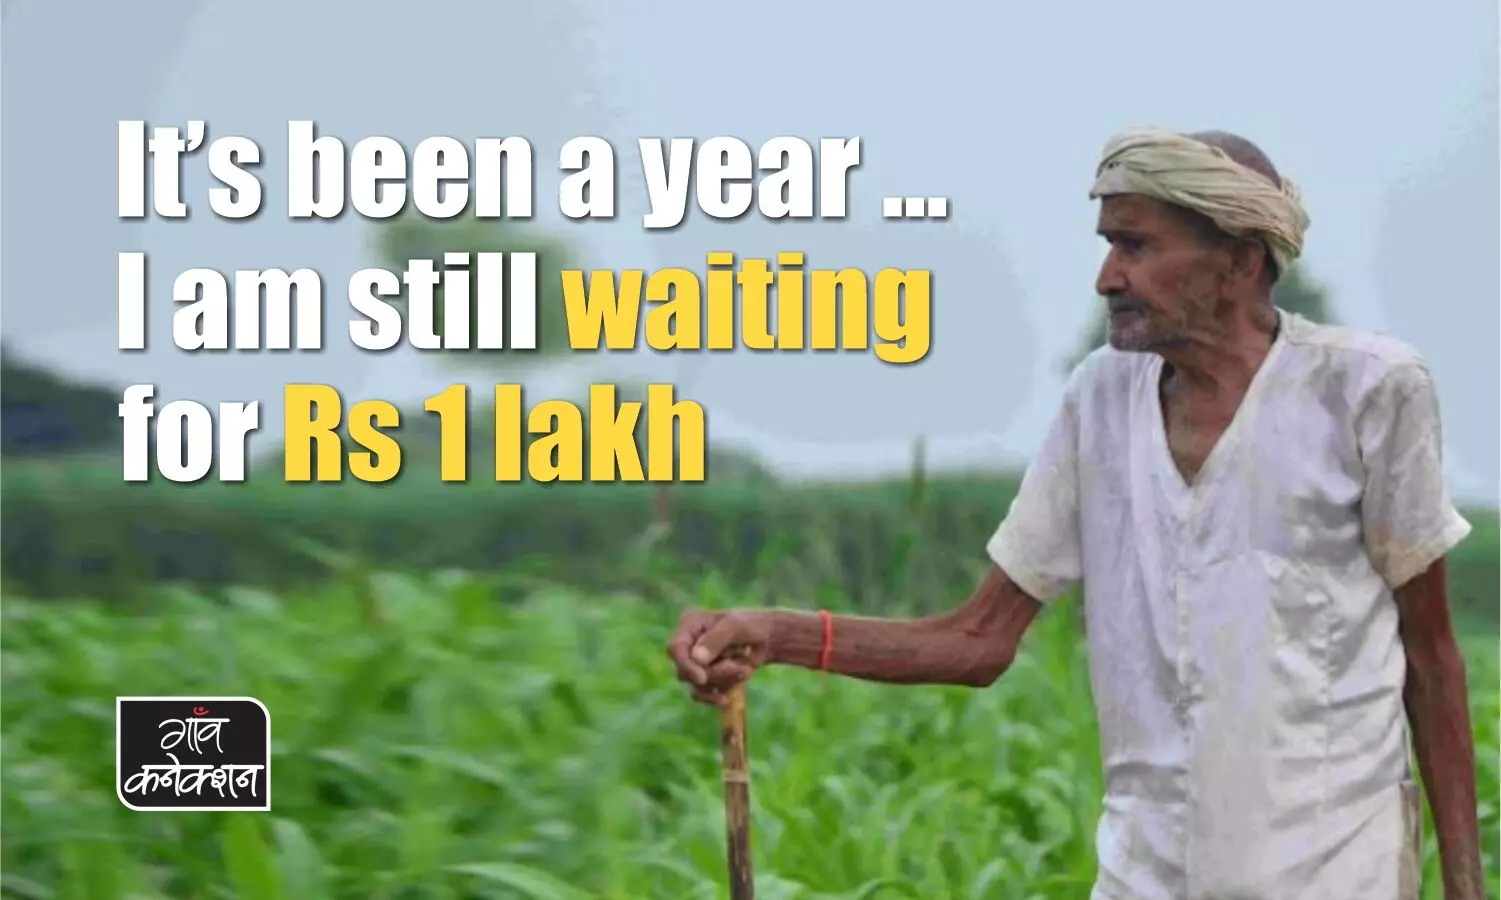 Thousands of farmers in Madhya Pradesh find themselves trapped amid loan waivers, bonus and price difference payment